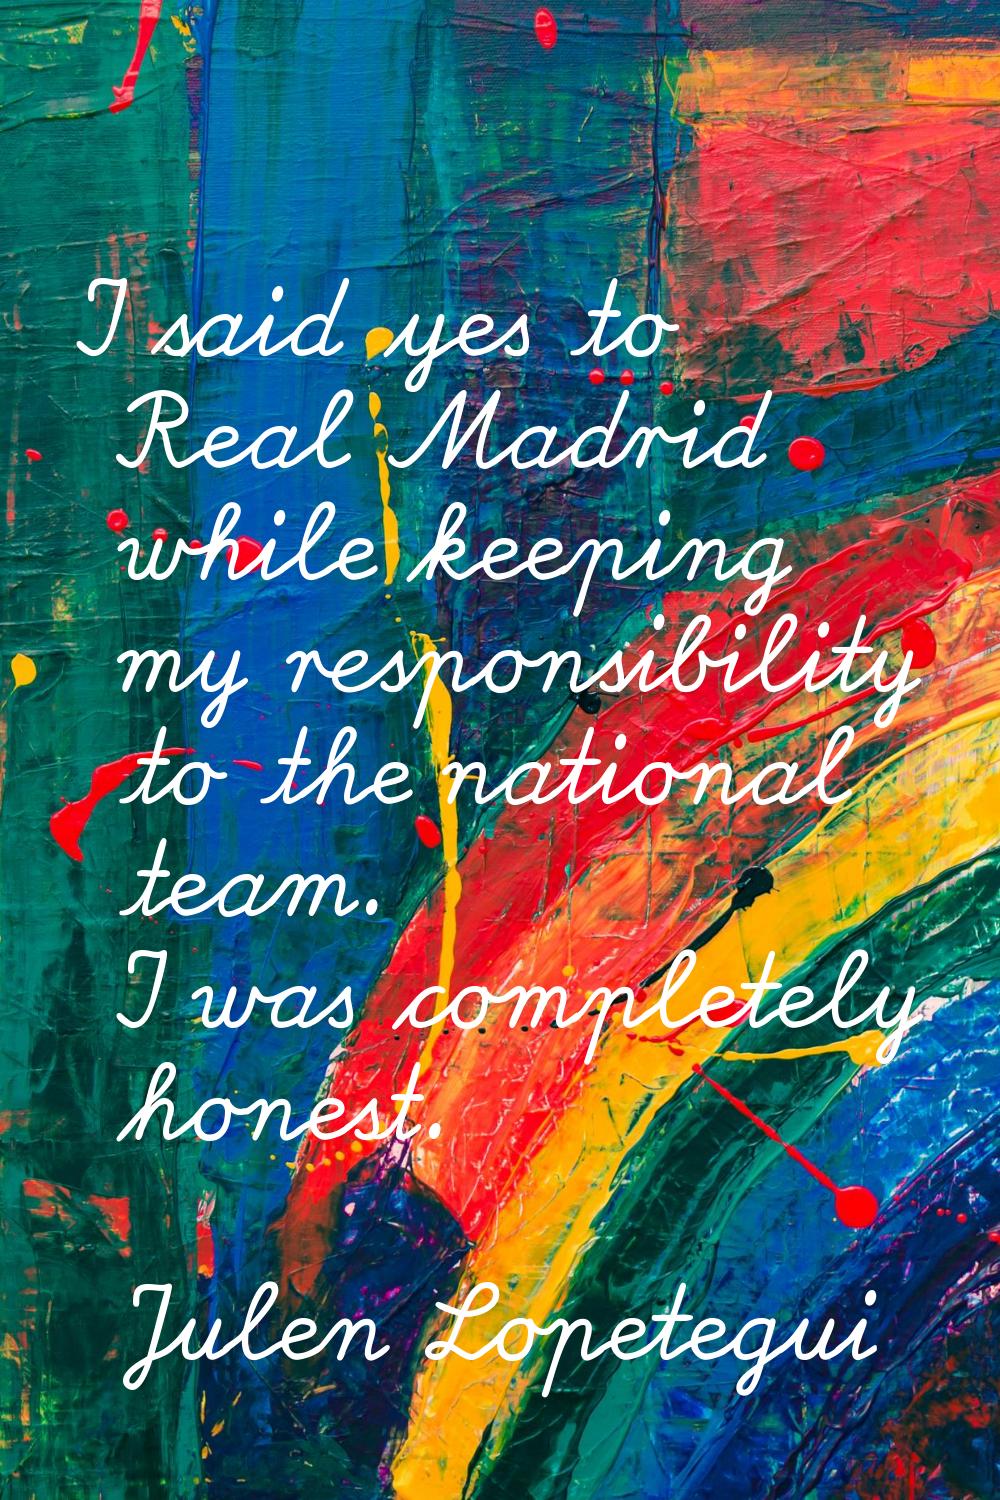 I said yes to Real Madrid while keeping my responsibility to the national team. I was completely ho